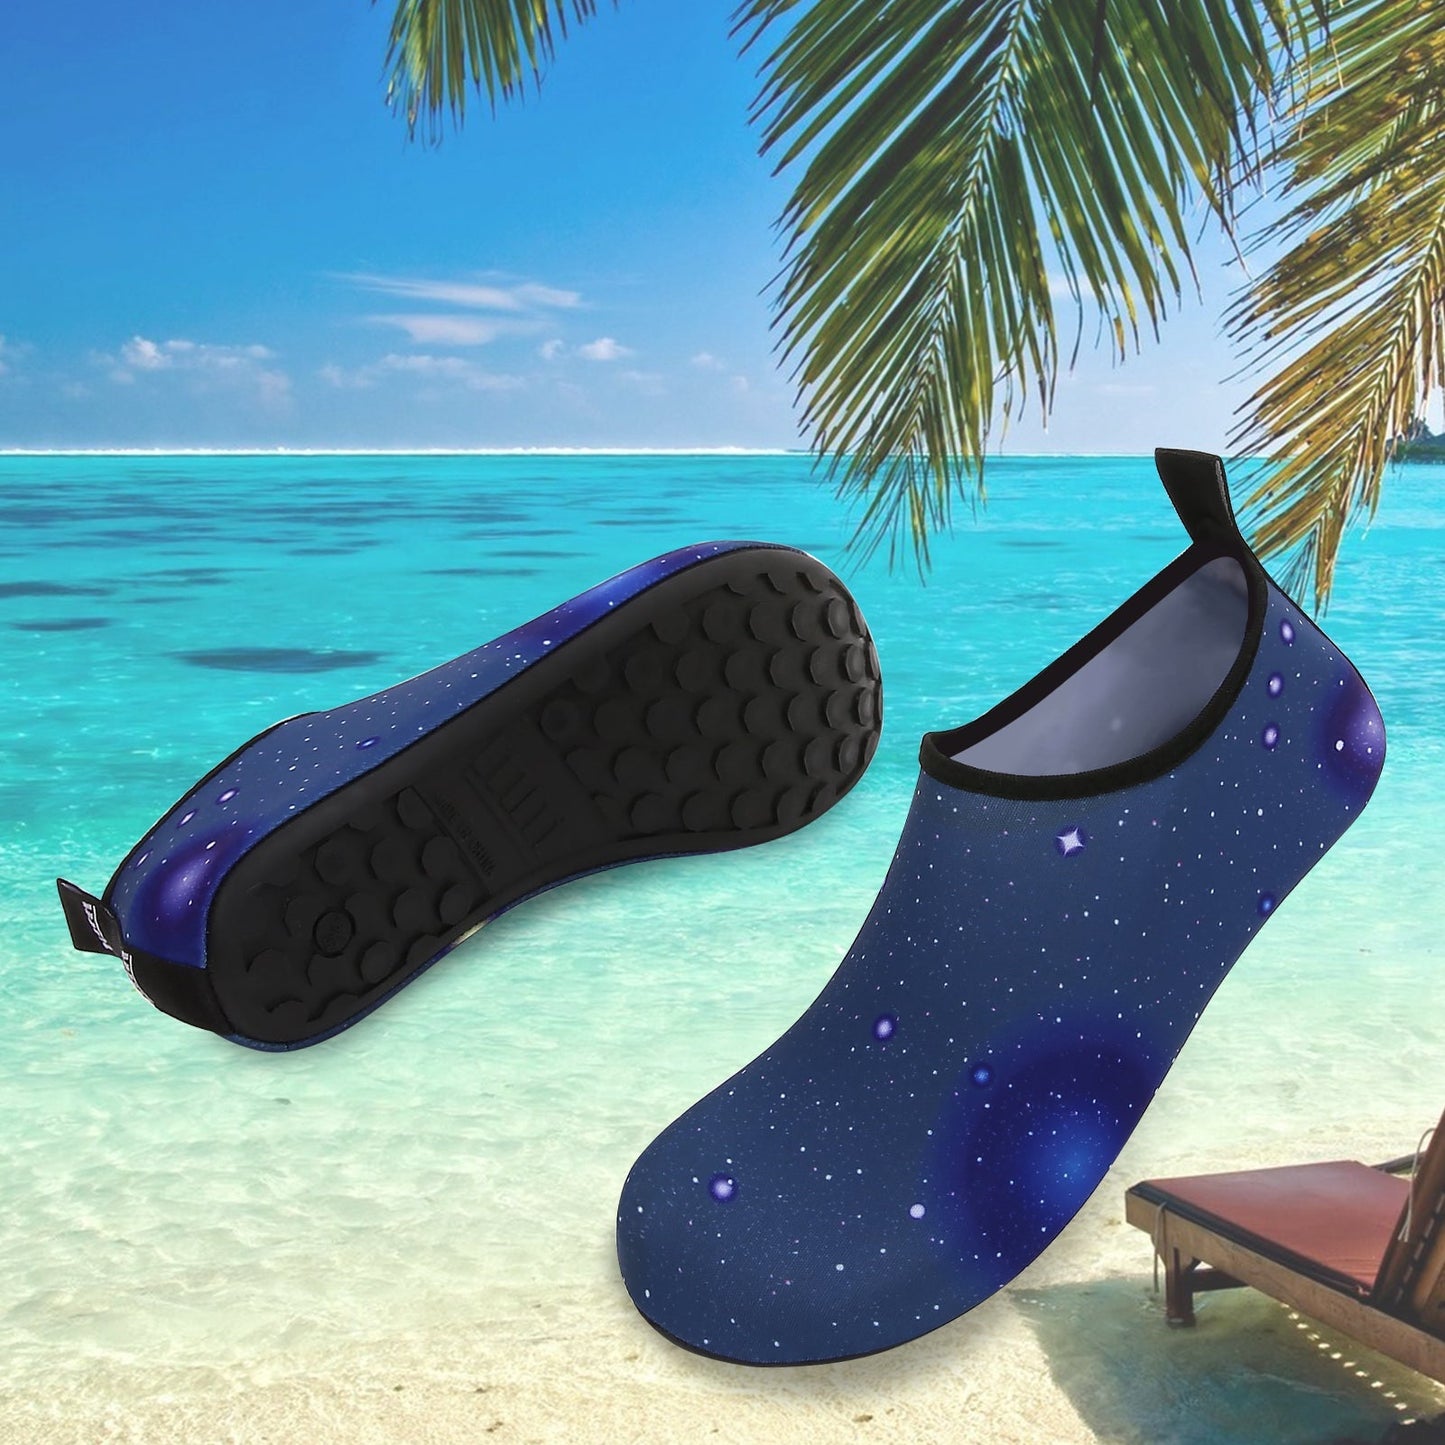 Men and Women a Slip On Barefoot Quick-Dry Beach Aqua Yoga Water Shoes (Space/Black)